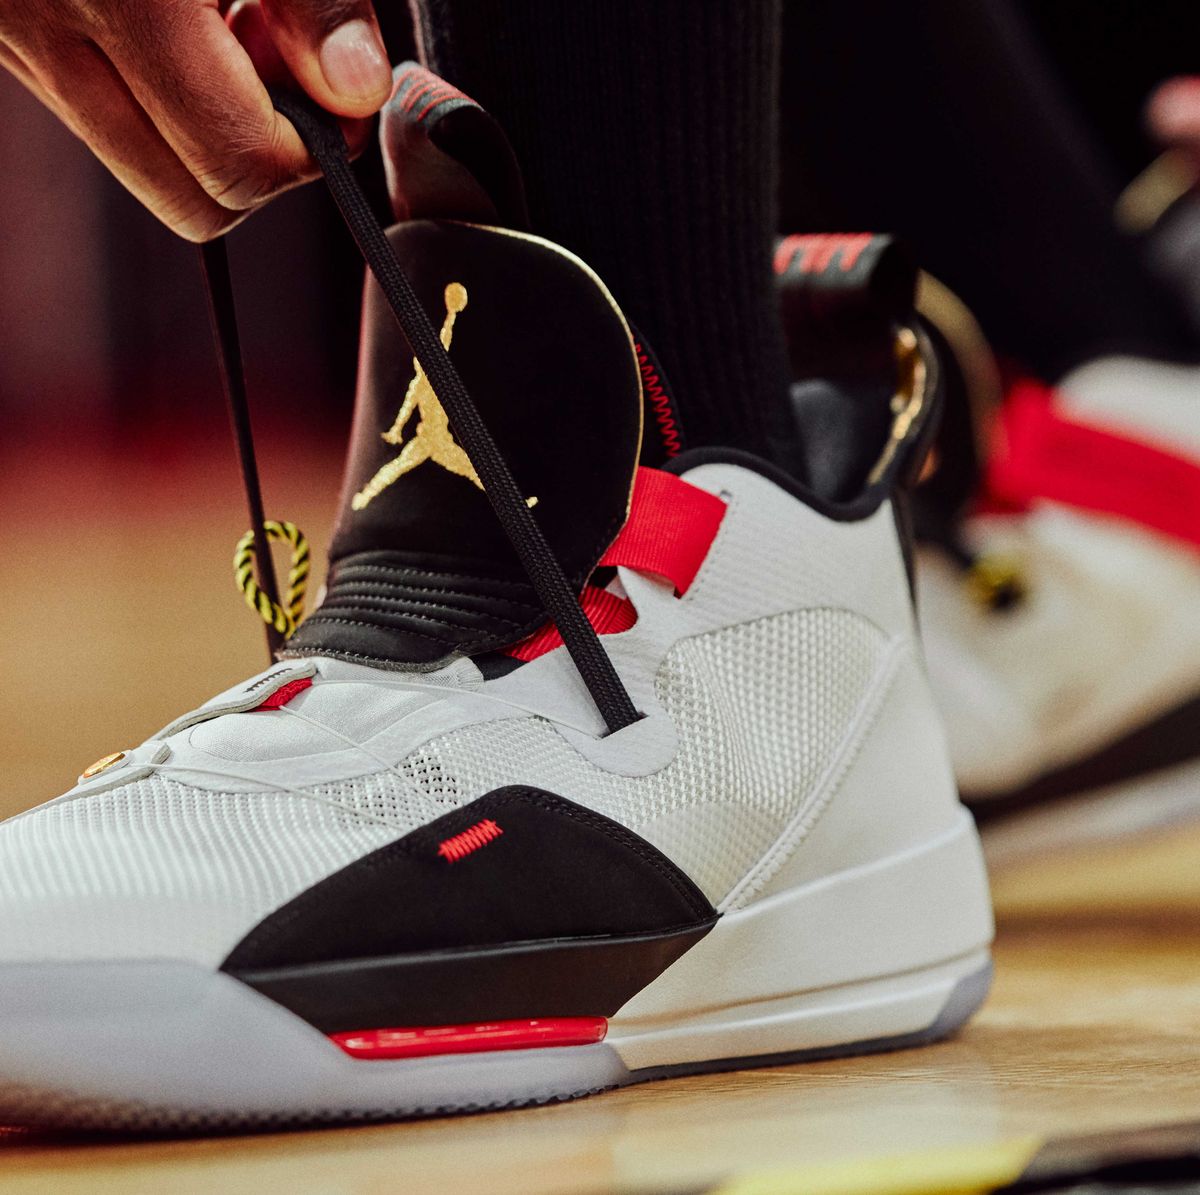 The Air Jordan 33 Is Designed to the Game